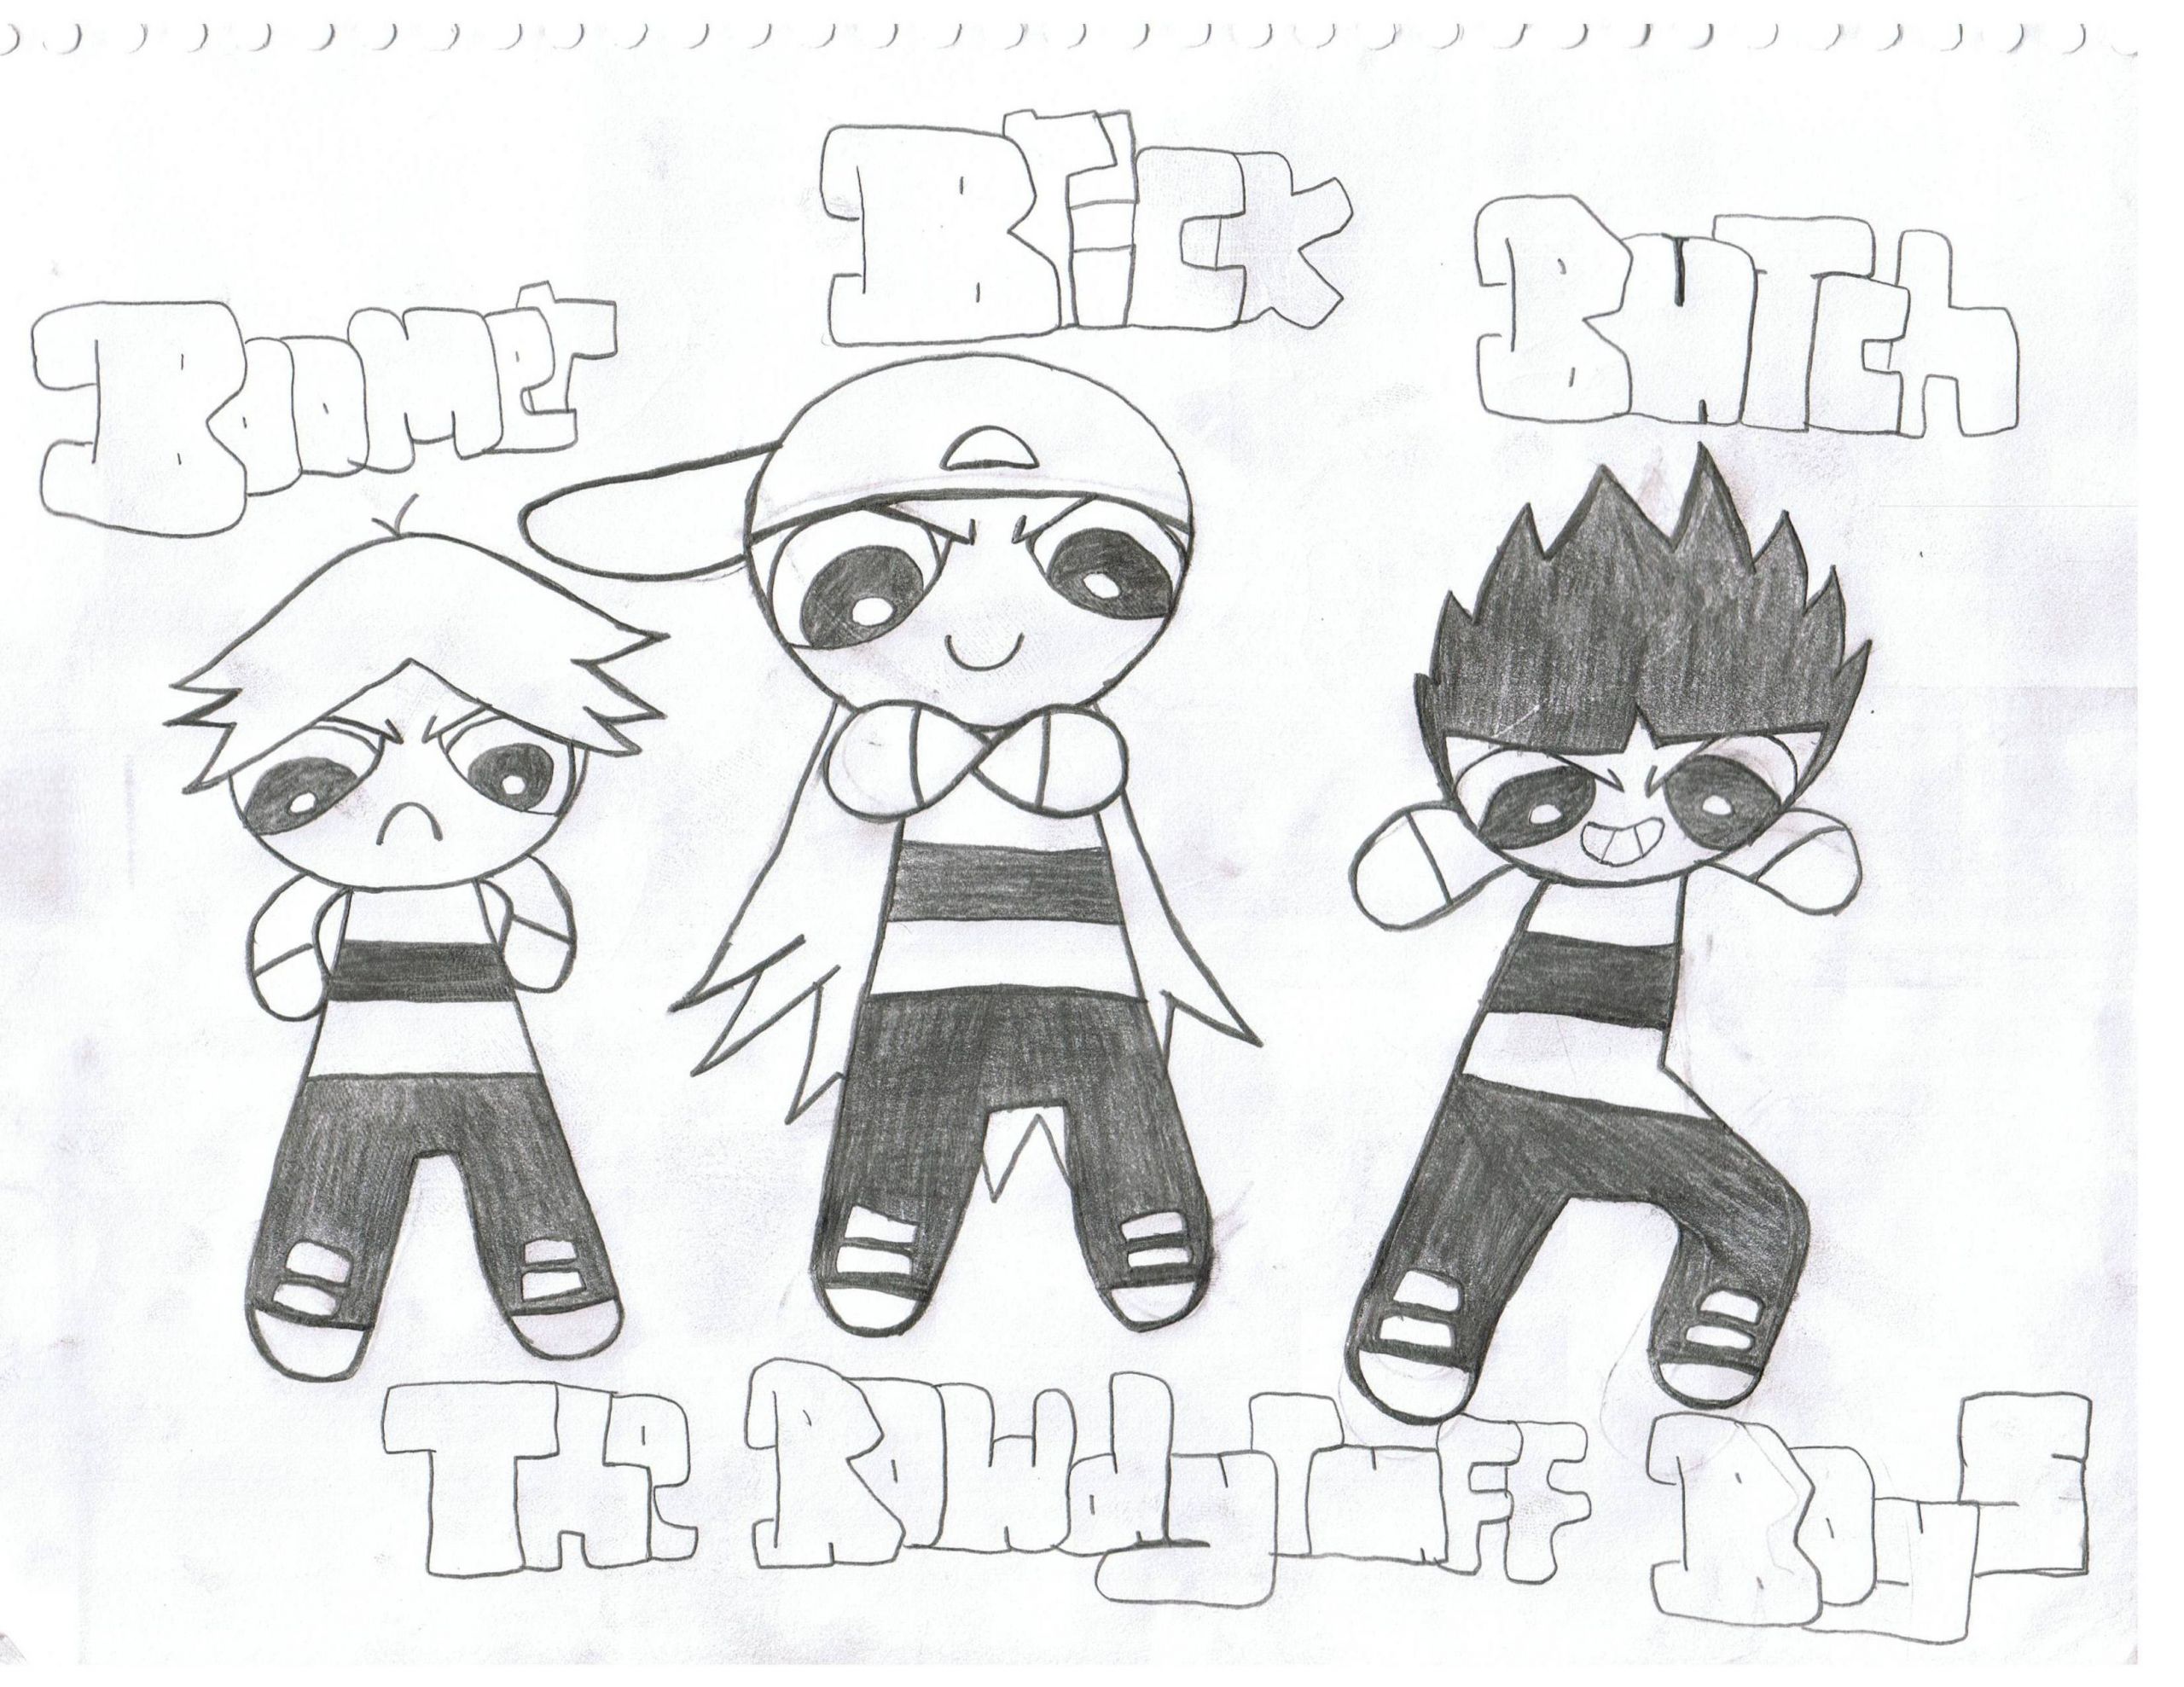 Rowdyruff Boys Coloring Pages
 The RowdyRuff Boys Uncolored by kh2 SORA kidd63 Fanart